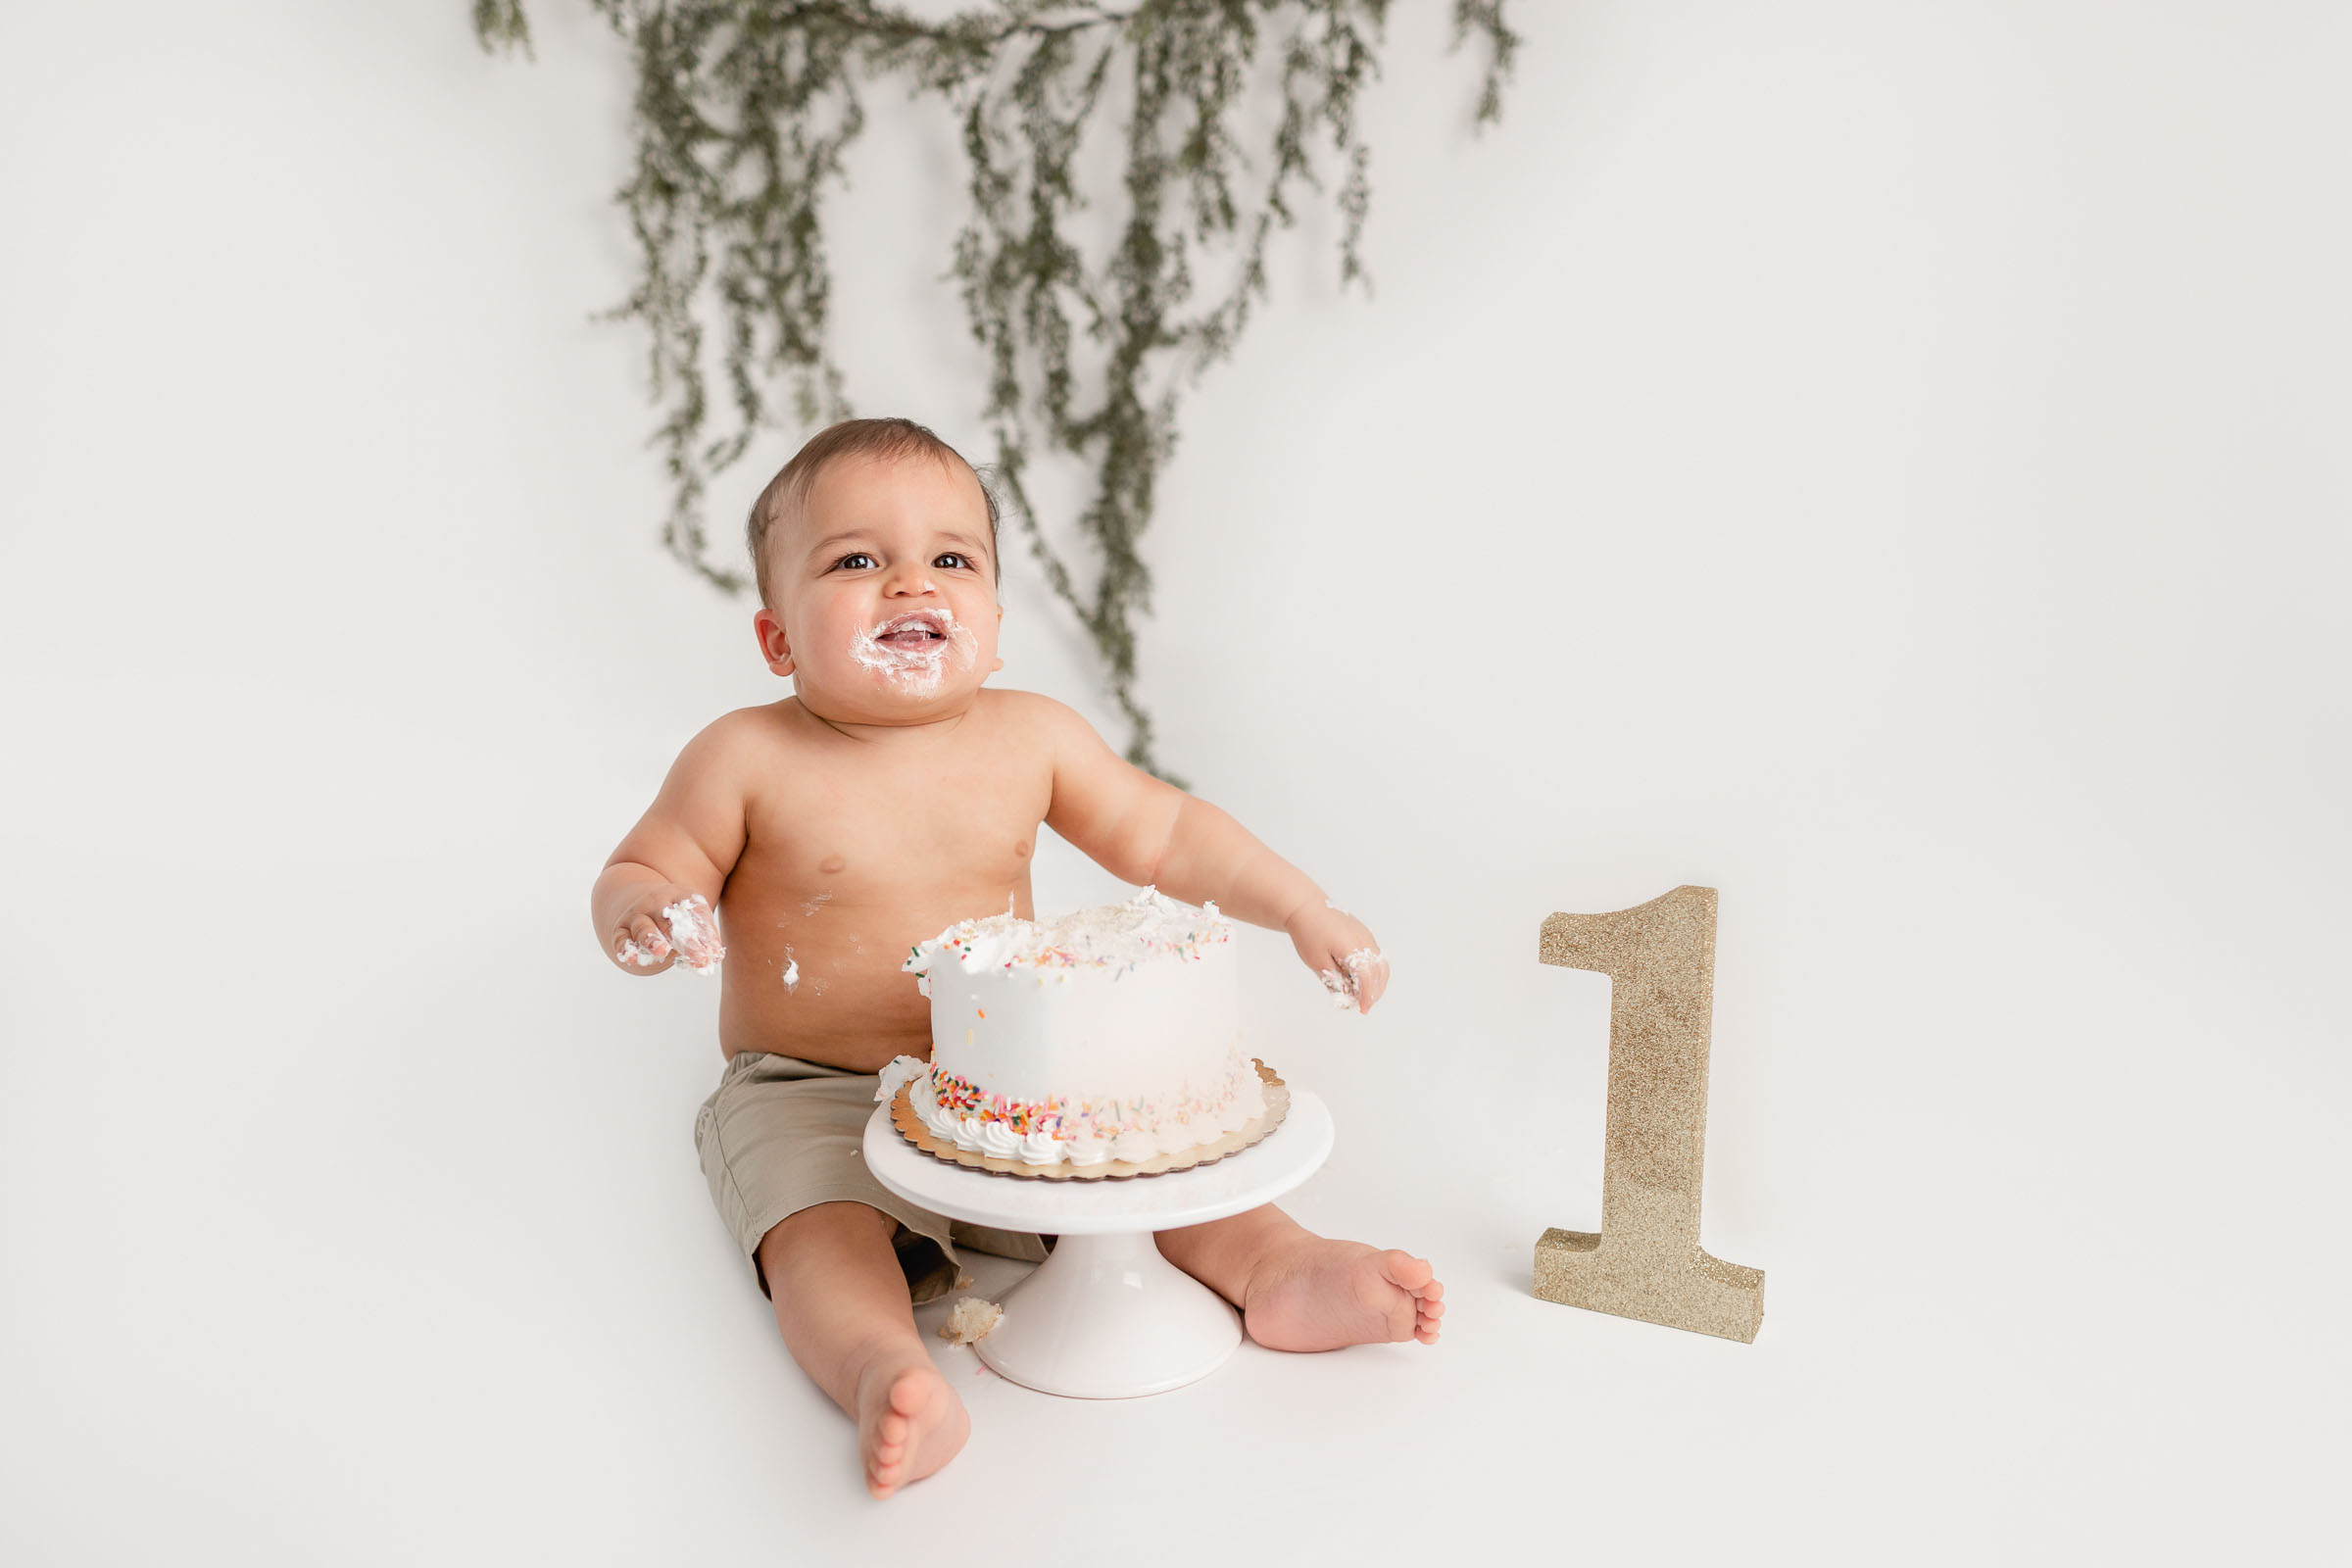 Boy in just shorts sitting behind his cake with cake on his face smiling for his cake smash pictures